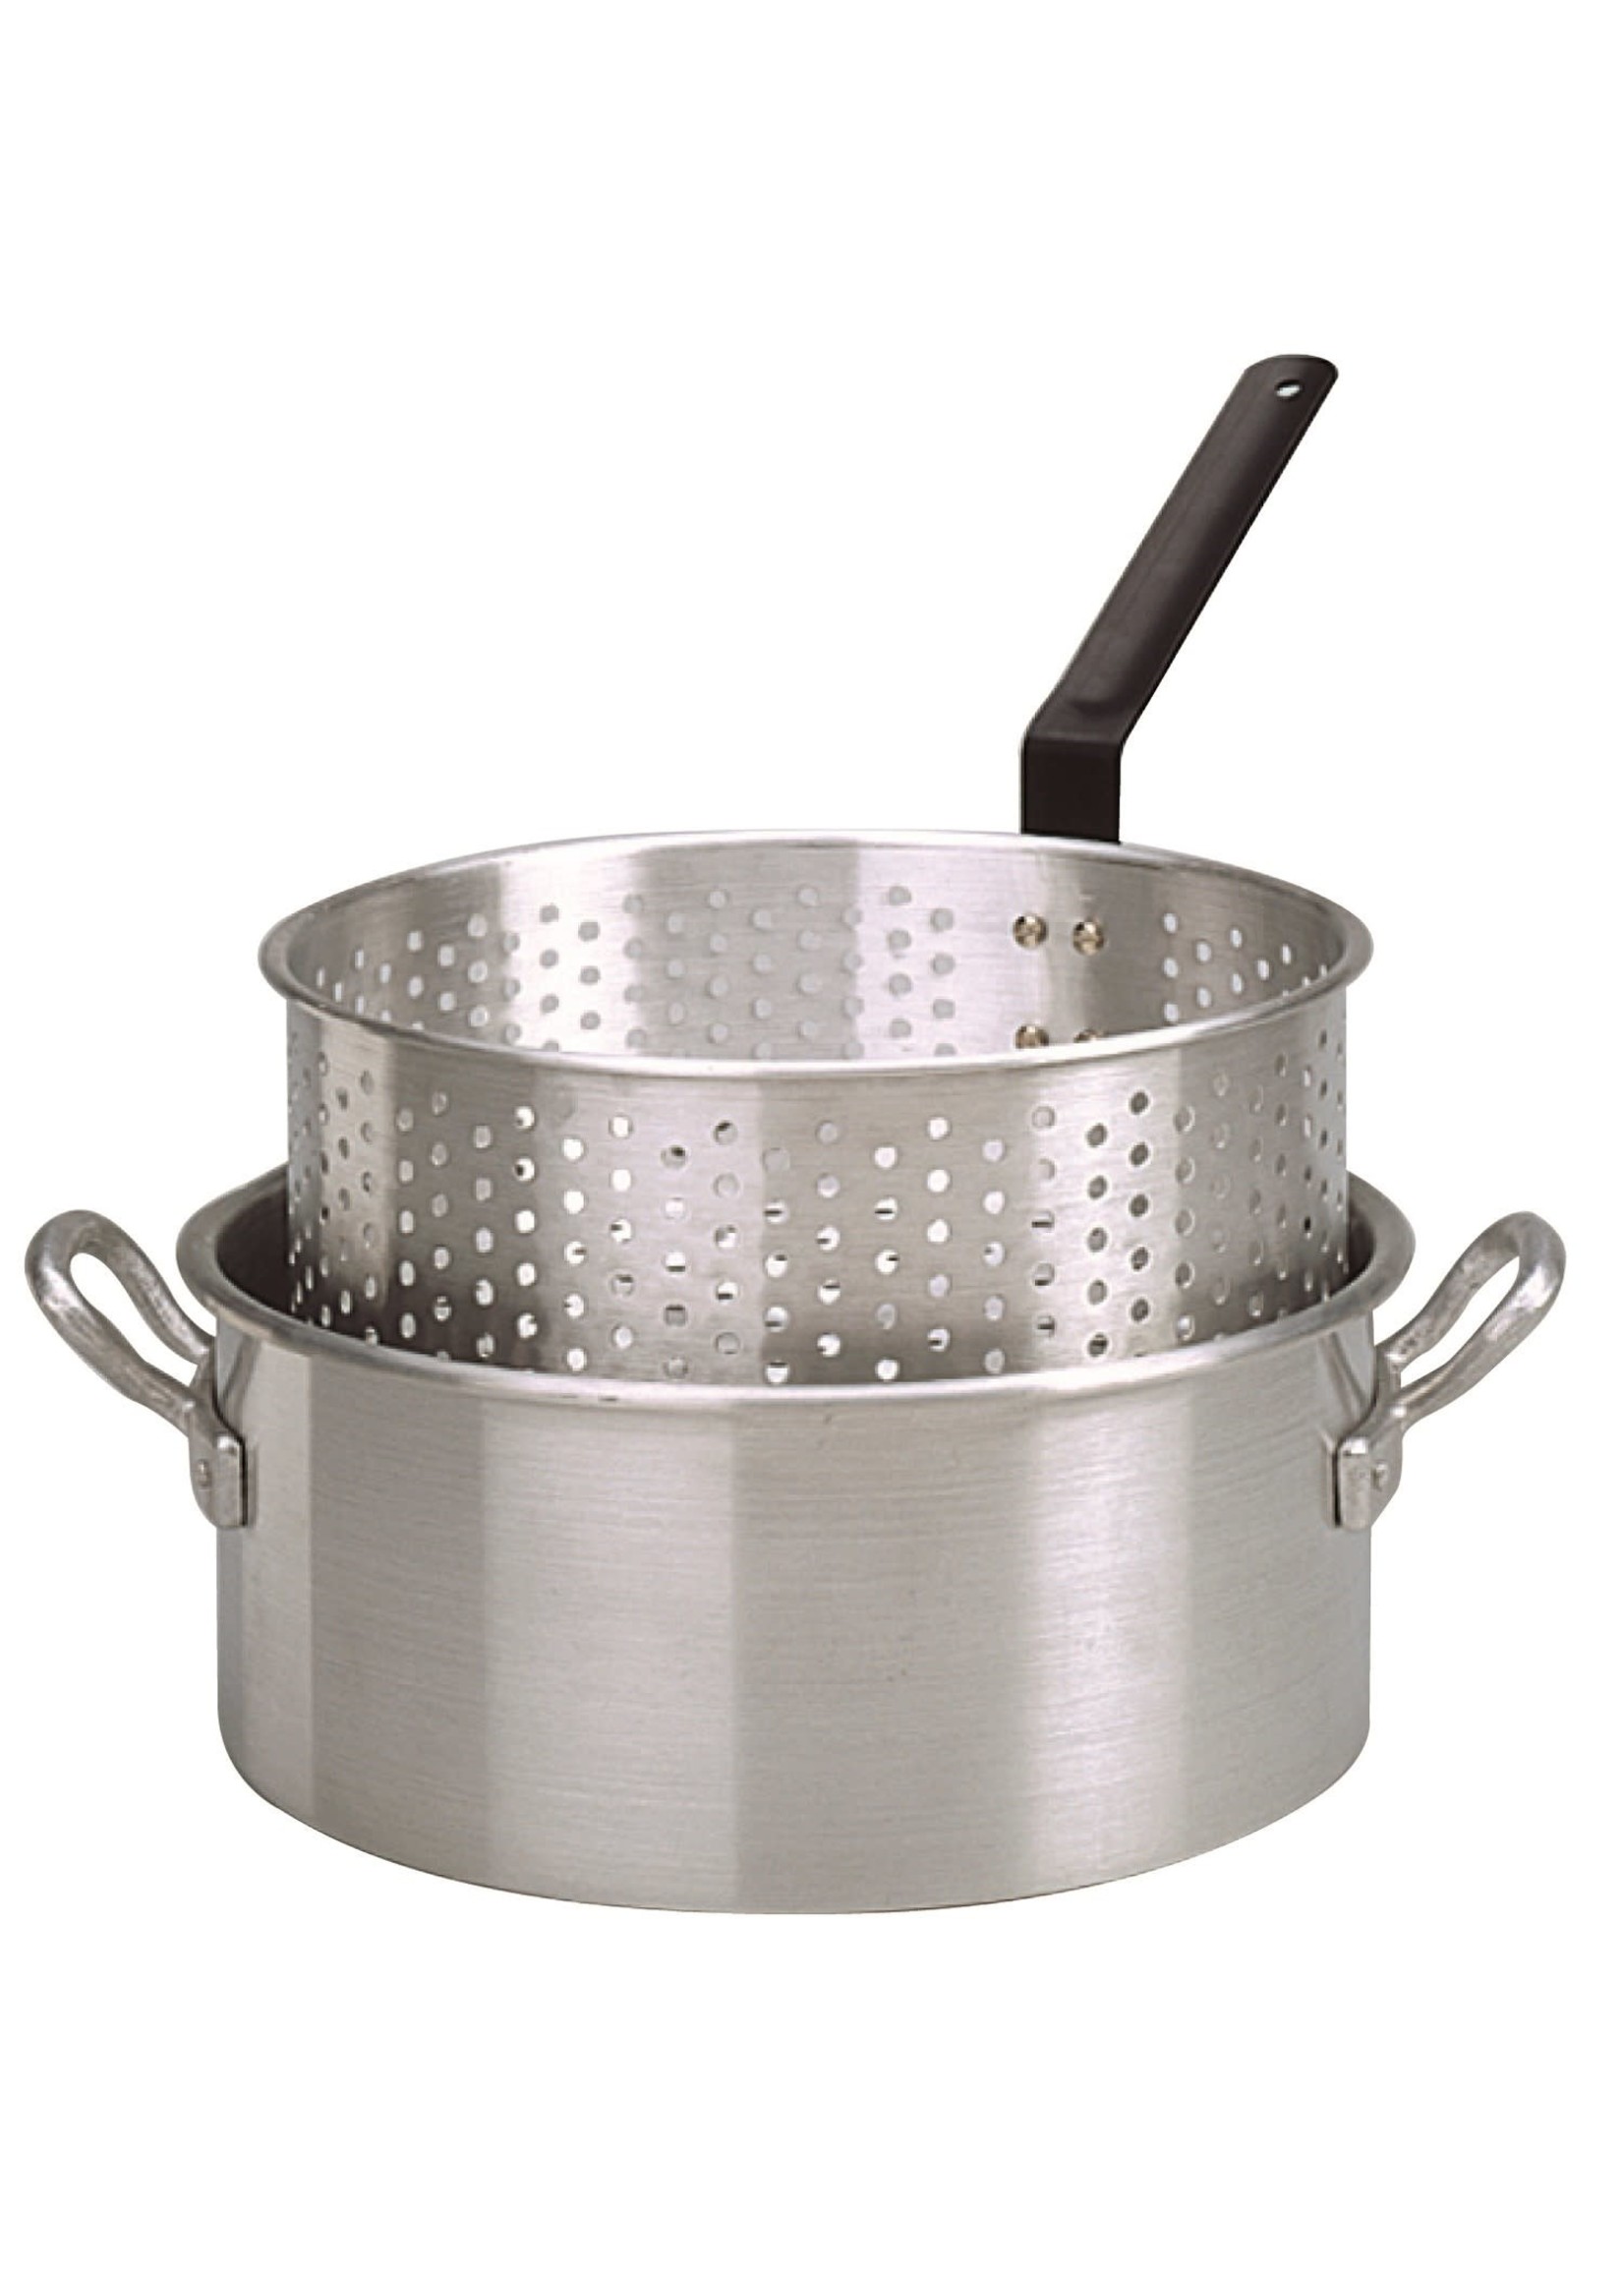 KING KOOKER HEAVY DUTY ALUMINUM FRY PAN WITH PUNCHED ALUMINUM BASKET